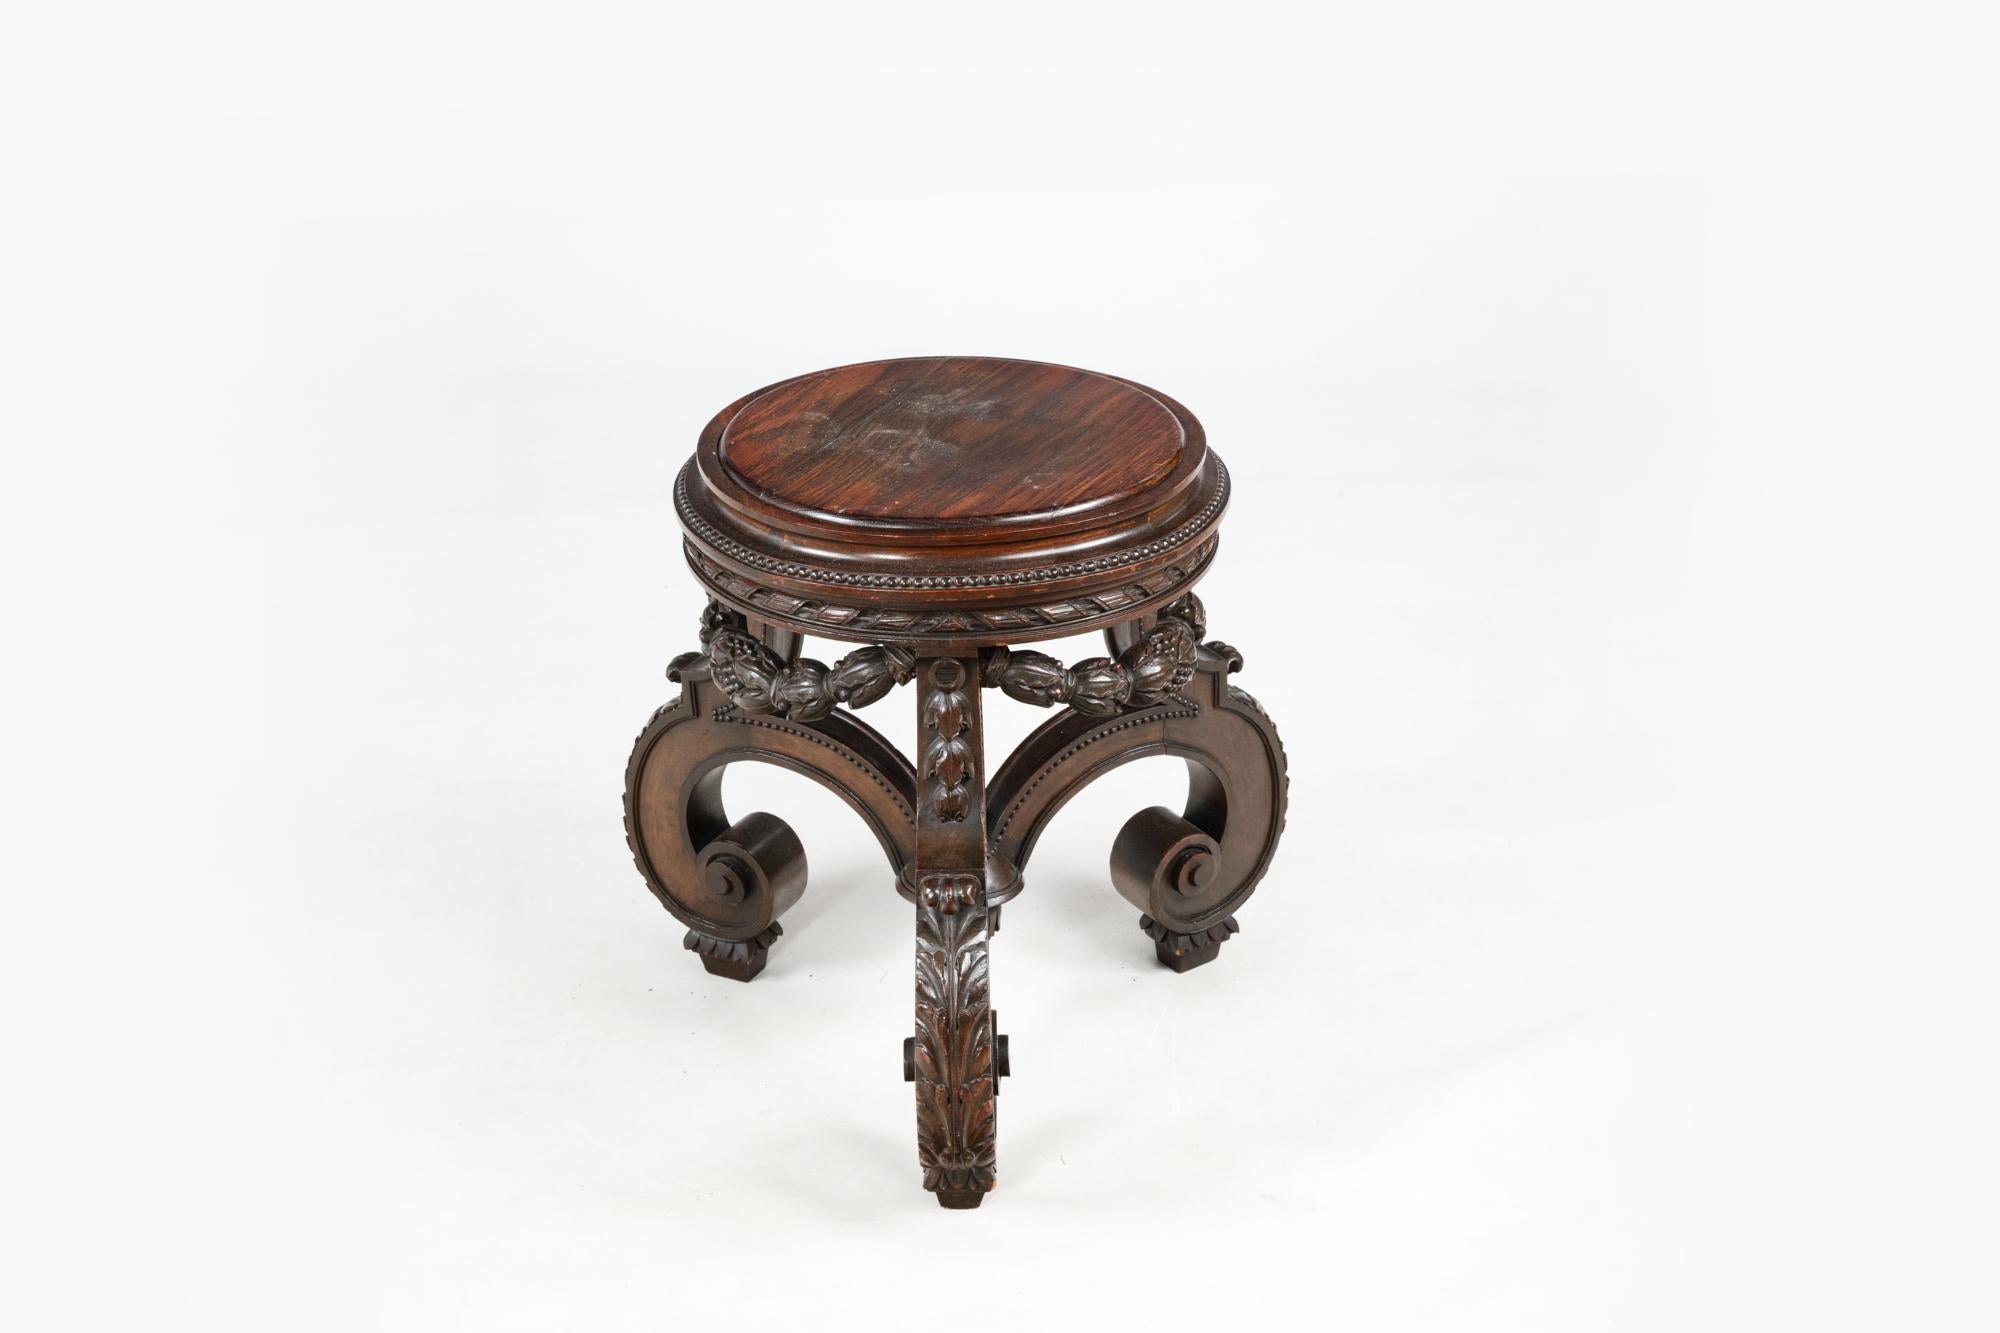 Ornately carved Chinese cherrywood pot stand, circa 1880. The carved and pierced hardwood frame sits below a dark brown circular hardwood top. The richly carved and pierced apron features ornate vine motifs. All raised on cabriole legs, carved in